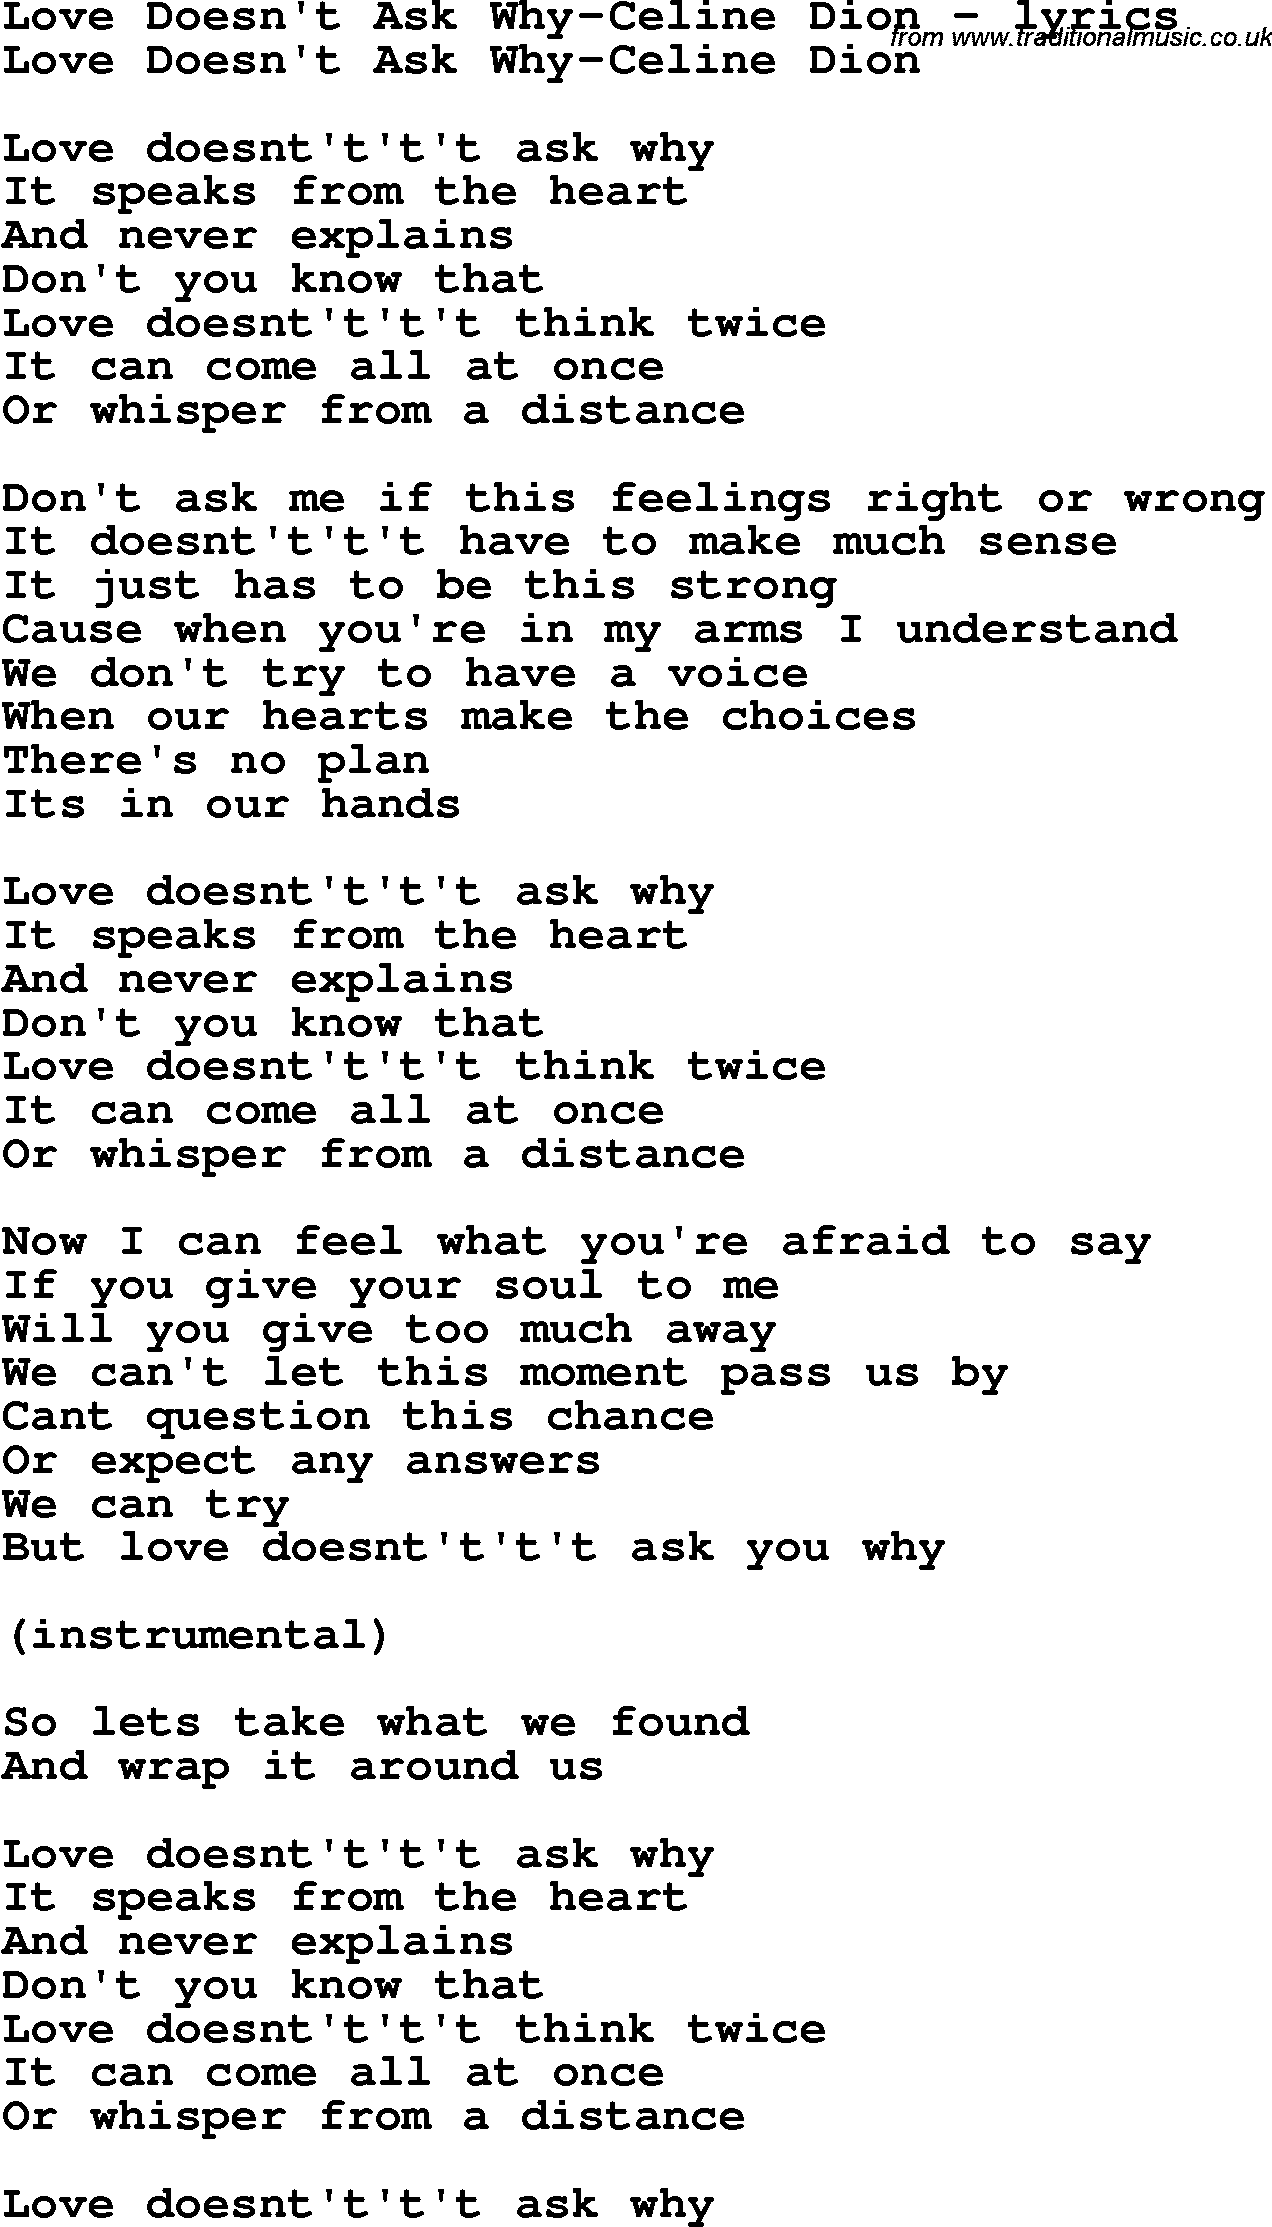 Love Song Lyrics for: Love Doesn't Ask Why-Celine Dion